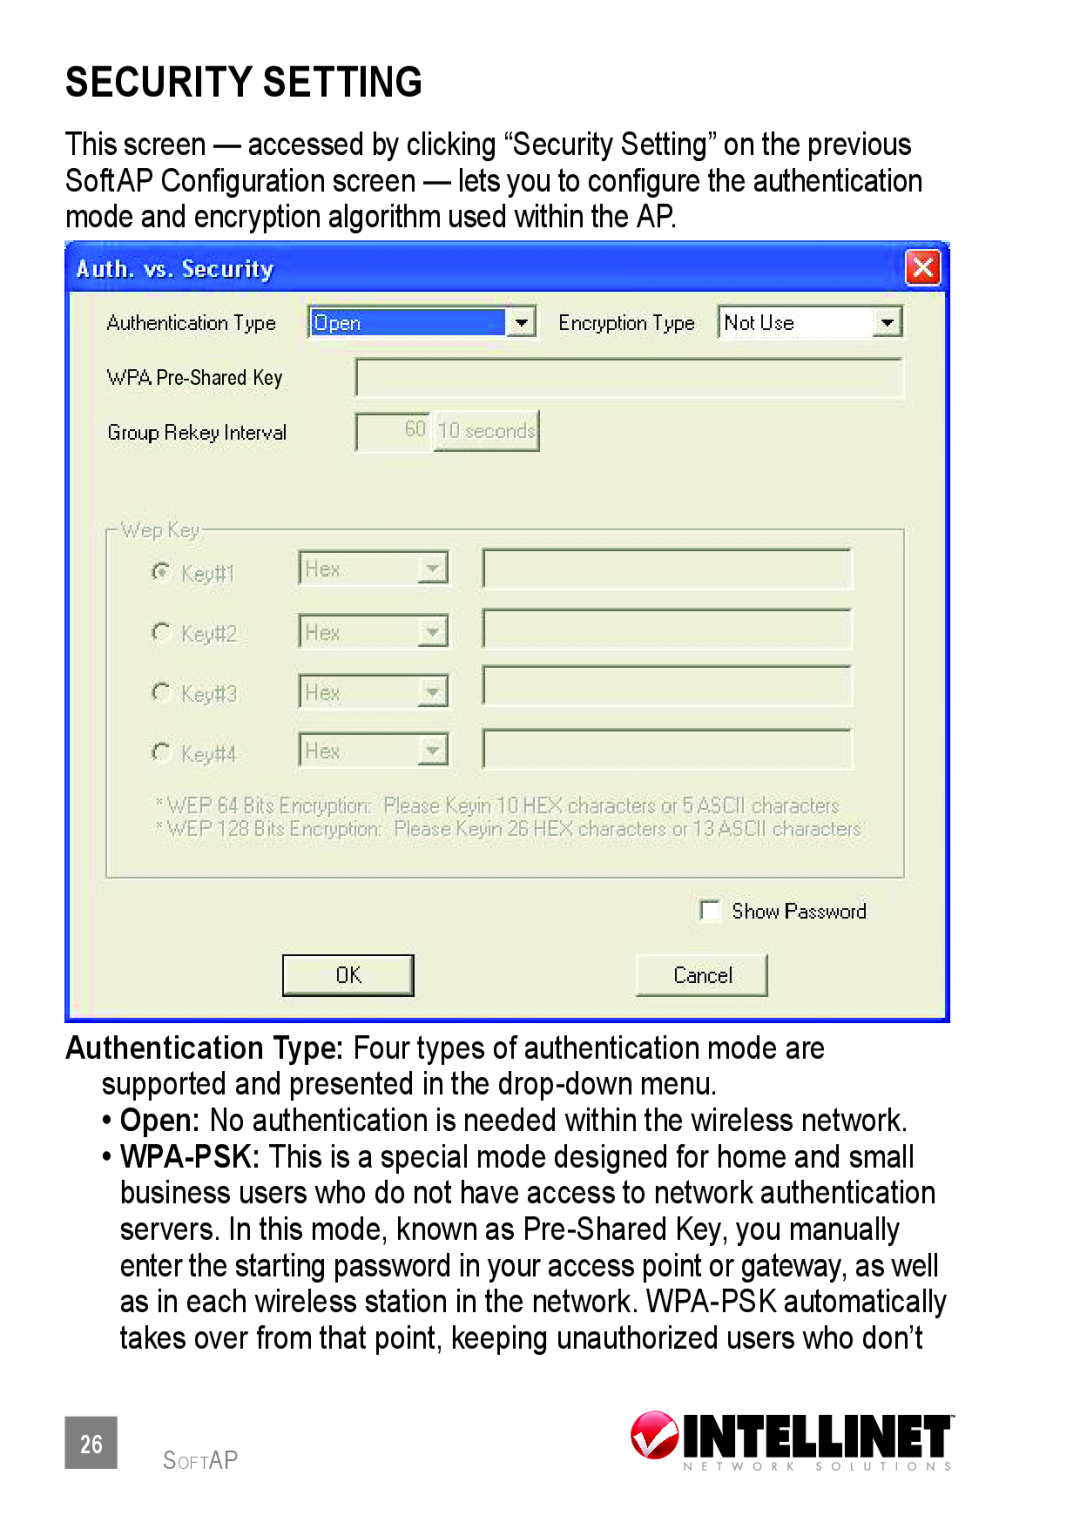 Intellinet Network Solutions 524438 security setting, Open No authentication is needed within the wireless network 